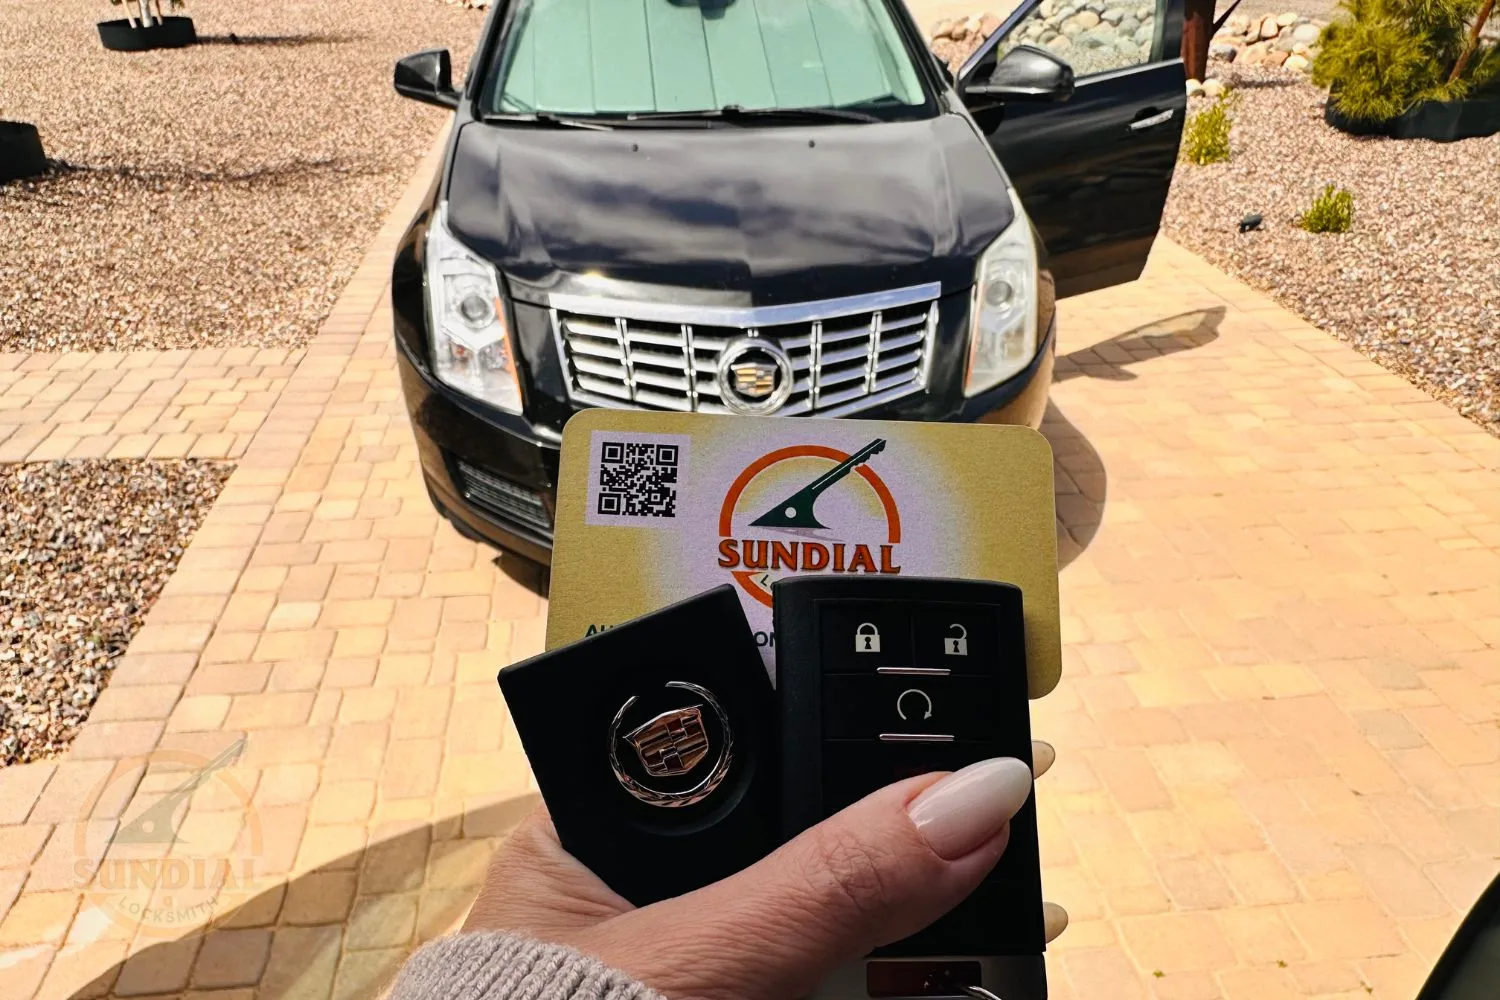 A person's hand holding a Cadillac key fob in front of a Cadillac car, with a Sundial Locksmith business card displayed prominently.